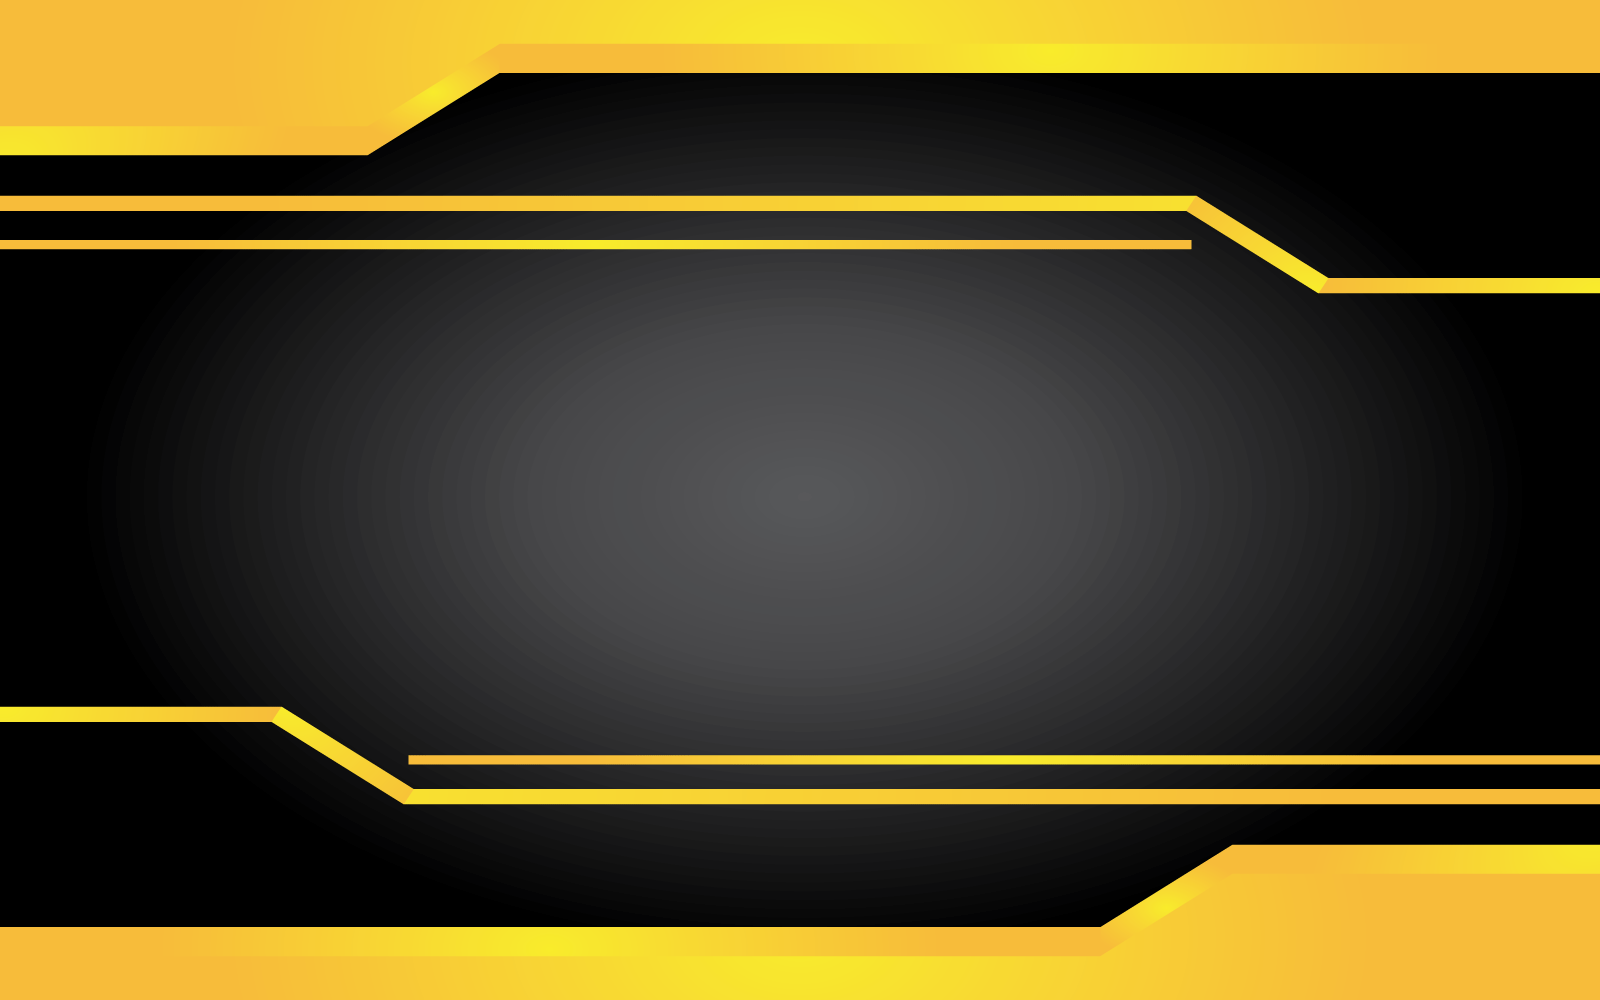 Construction metal background with black and yellow safety line template